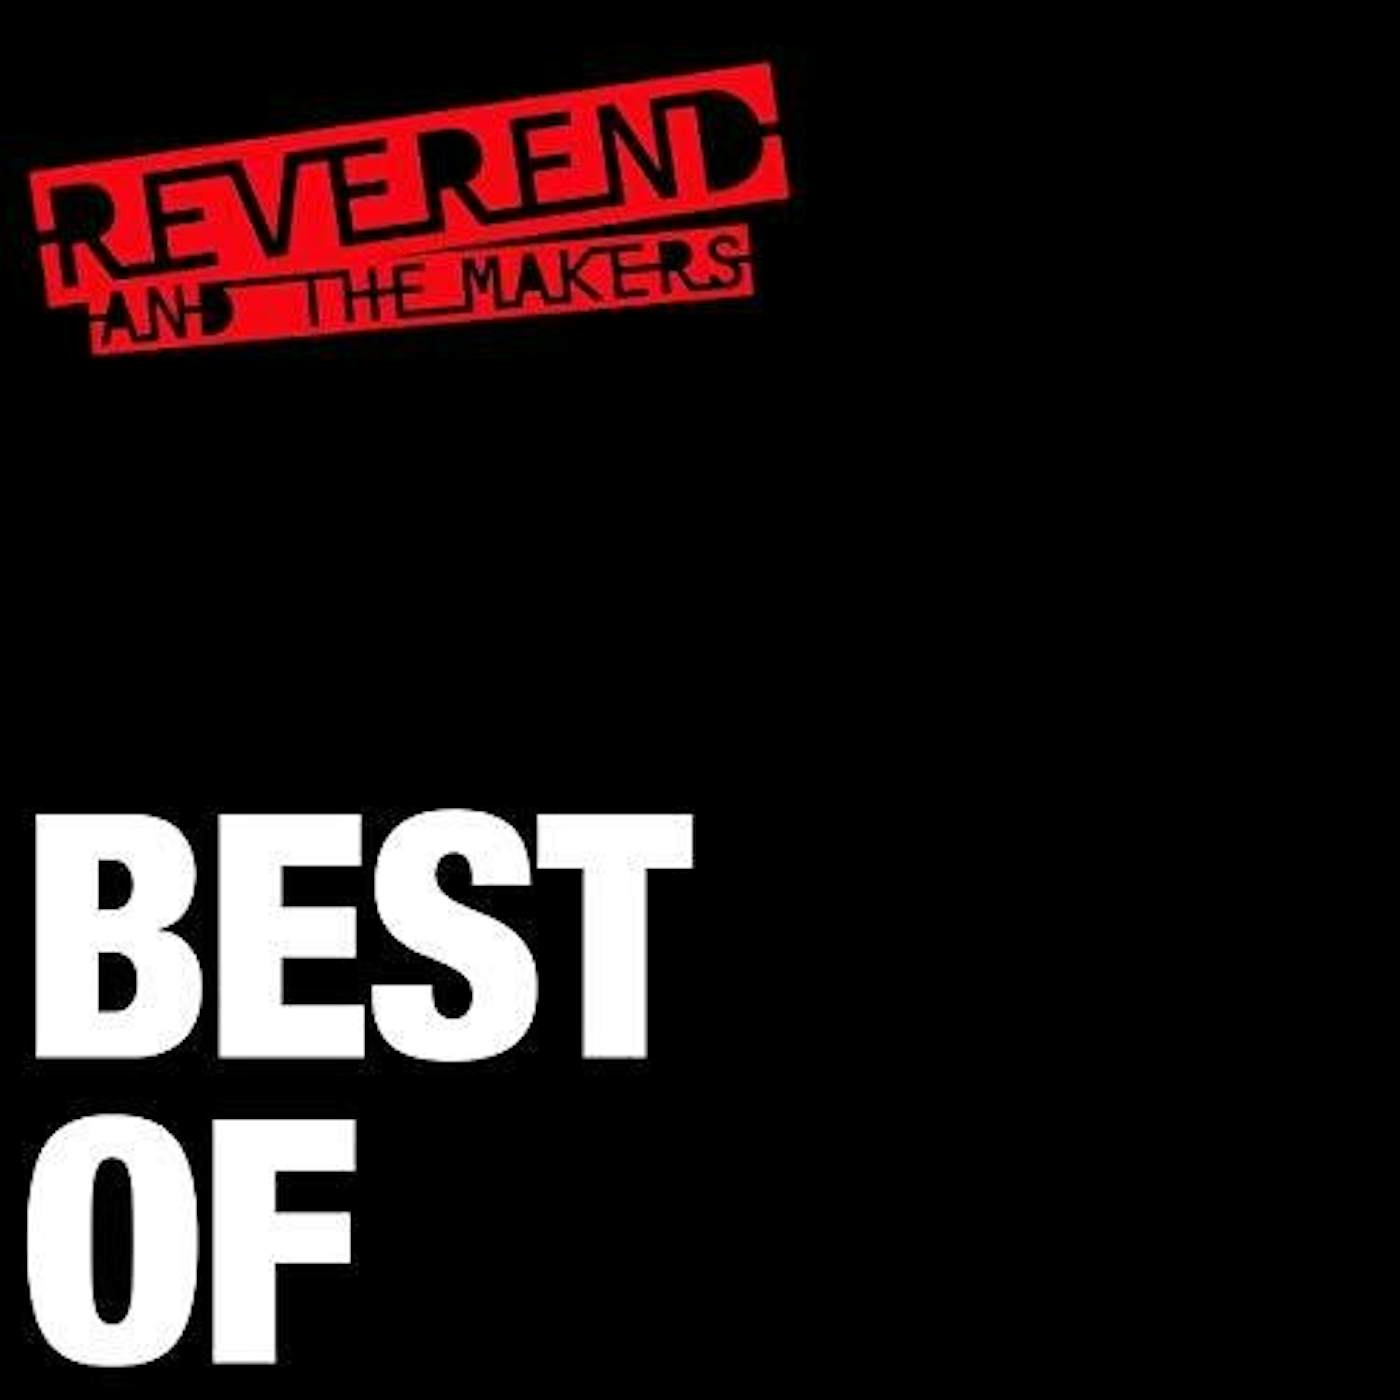 Reverend And The Makers Best Of Vinyl Record